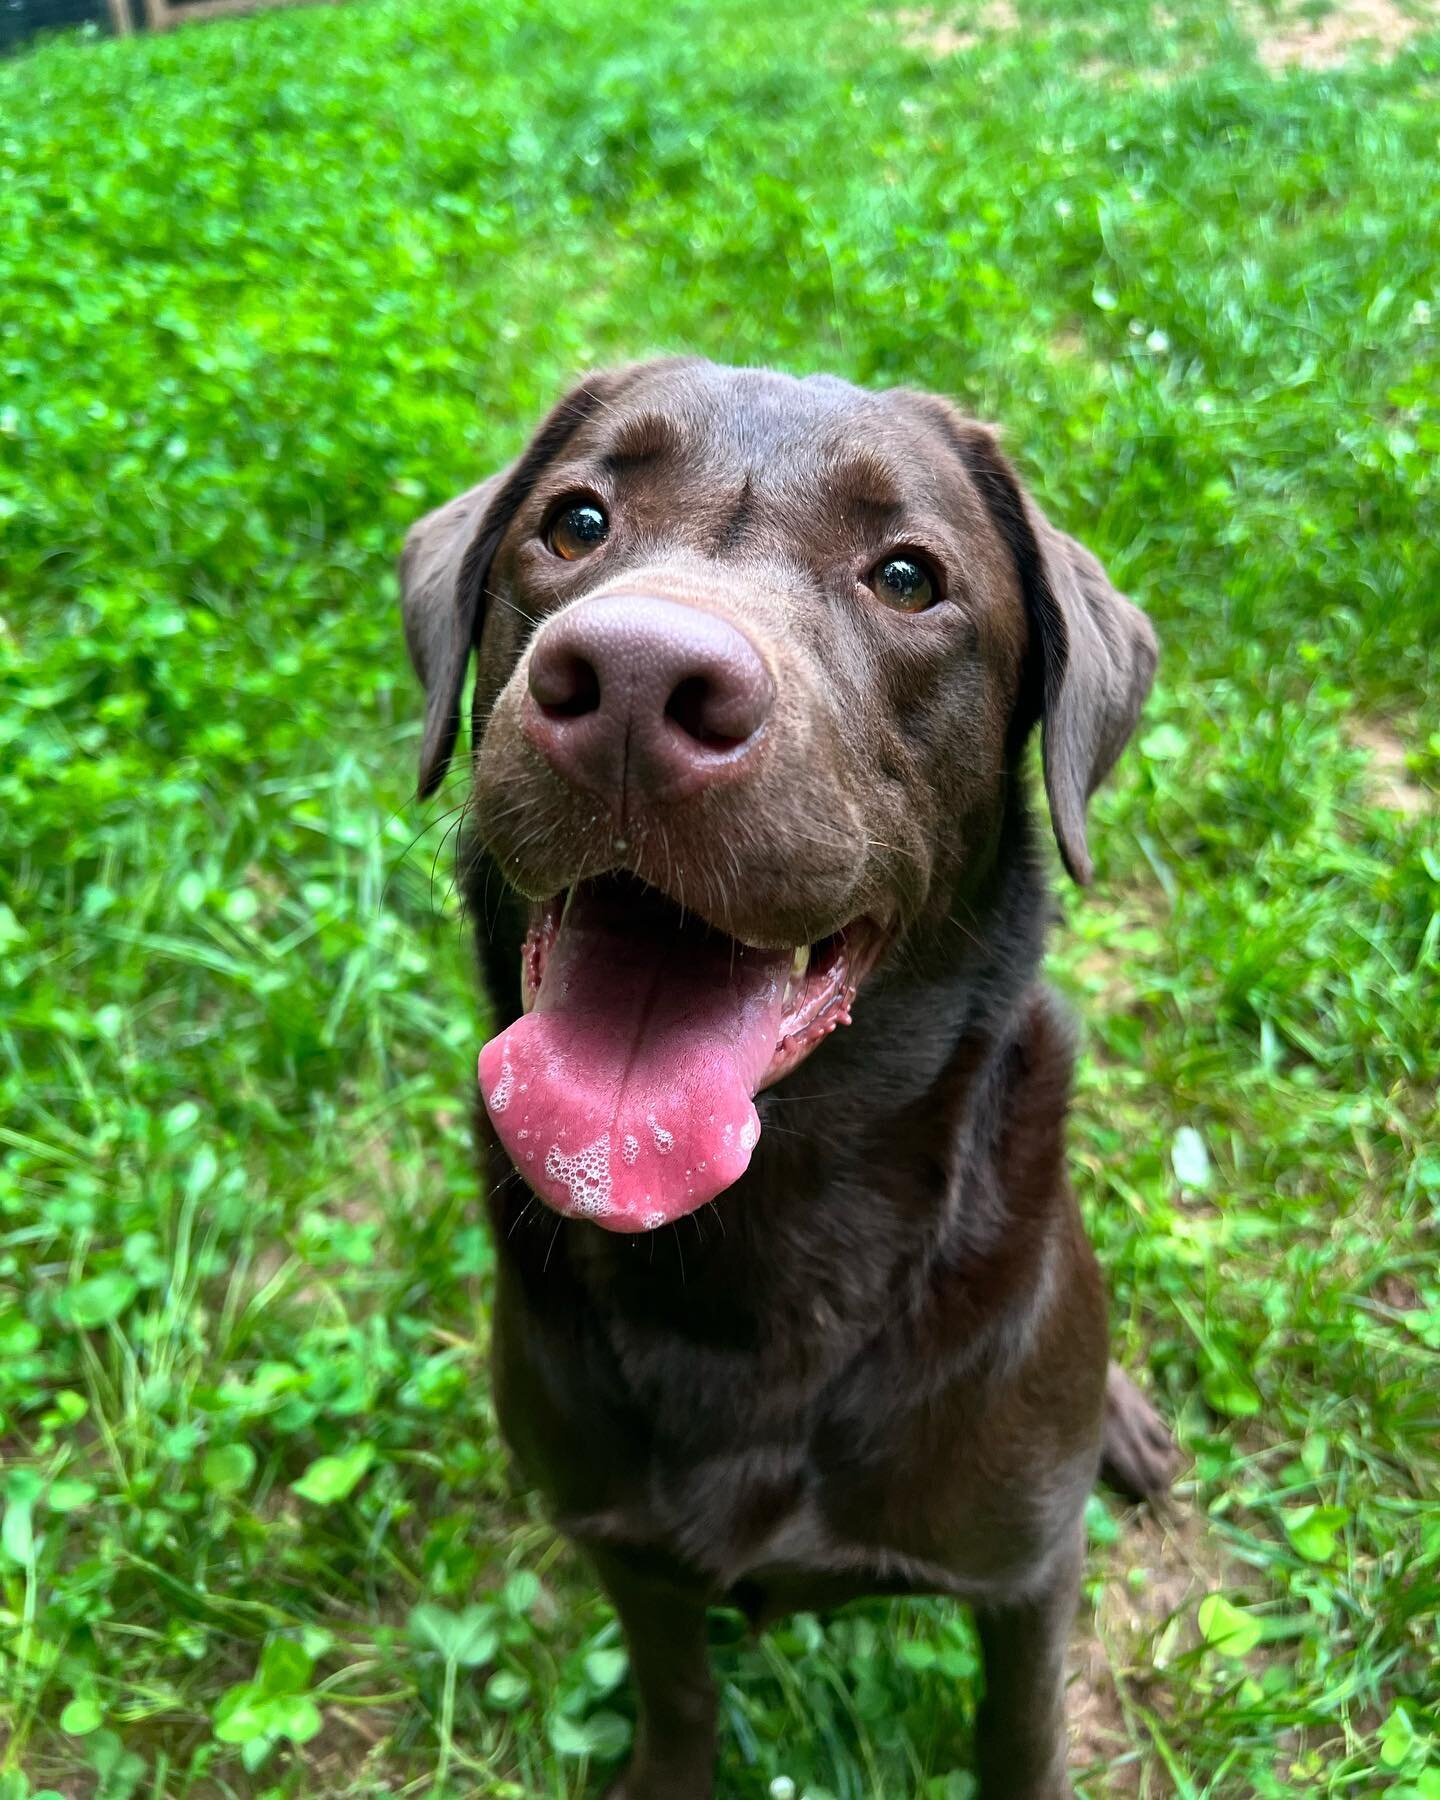 Everybody welcome Bella! She&rsquo;s a 2 year old lab here for our Advanced Adventure program! We&rsquo;ll be focusing on off leash and basic manners. Bella is a super smart girl and already catching on to routine. I can&rsquo;t wait to see this girl